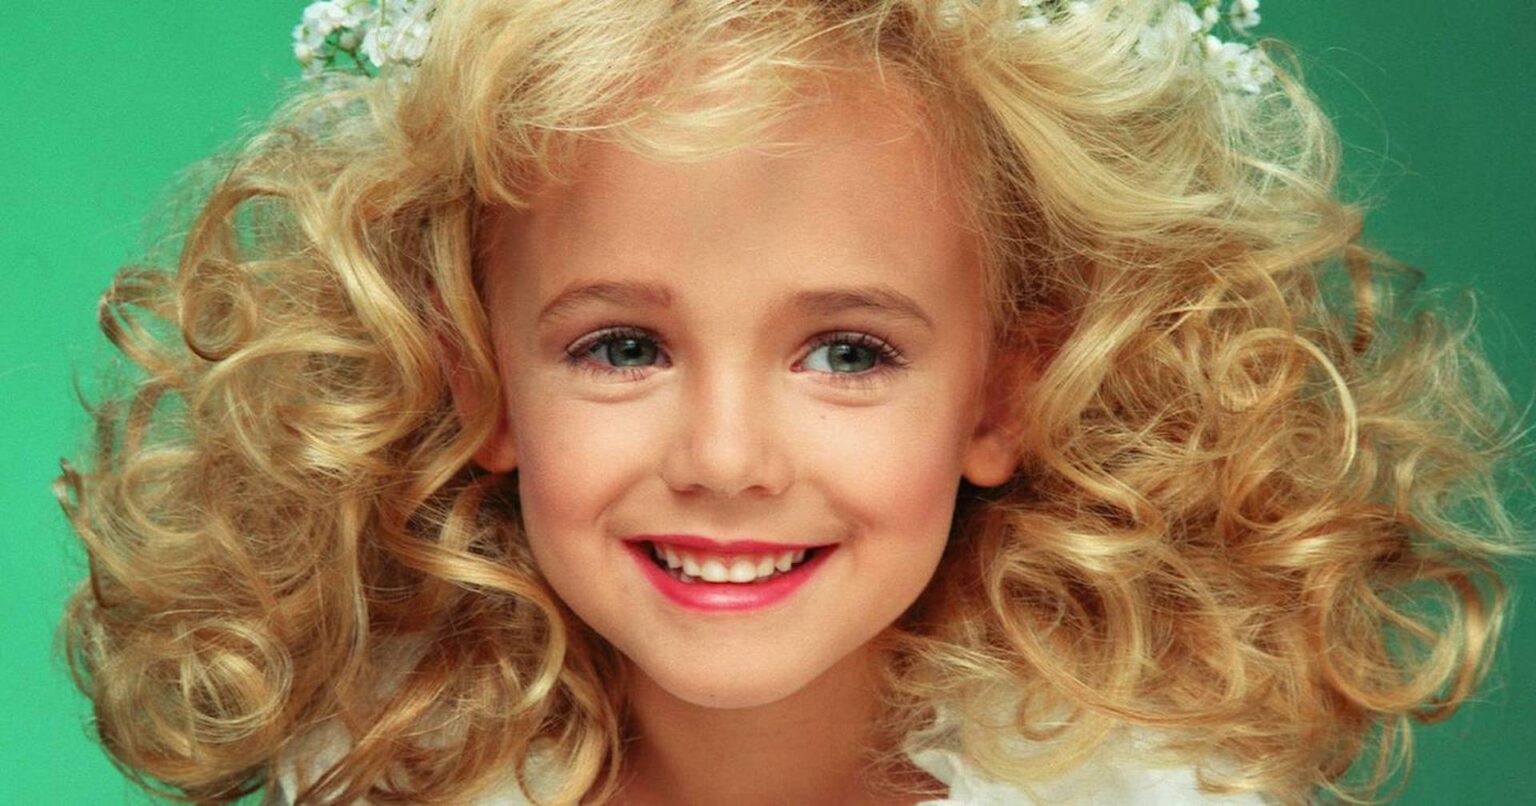 Some beauty queens tragically became legends after they died, nay, after they were killed. Discover the horrific case of JonBenét Ramsey.